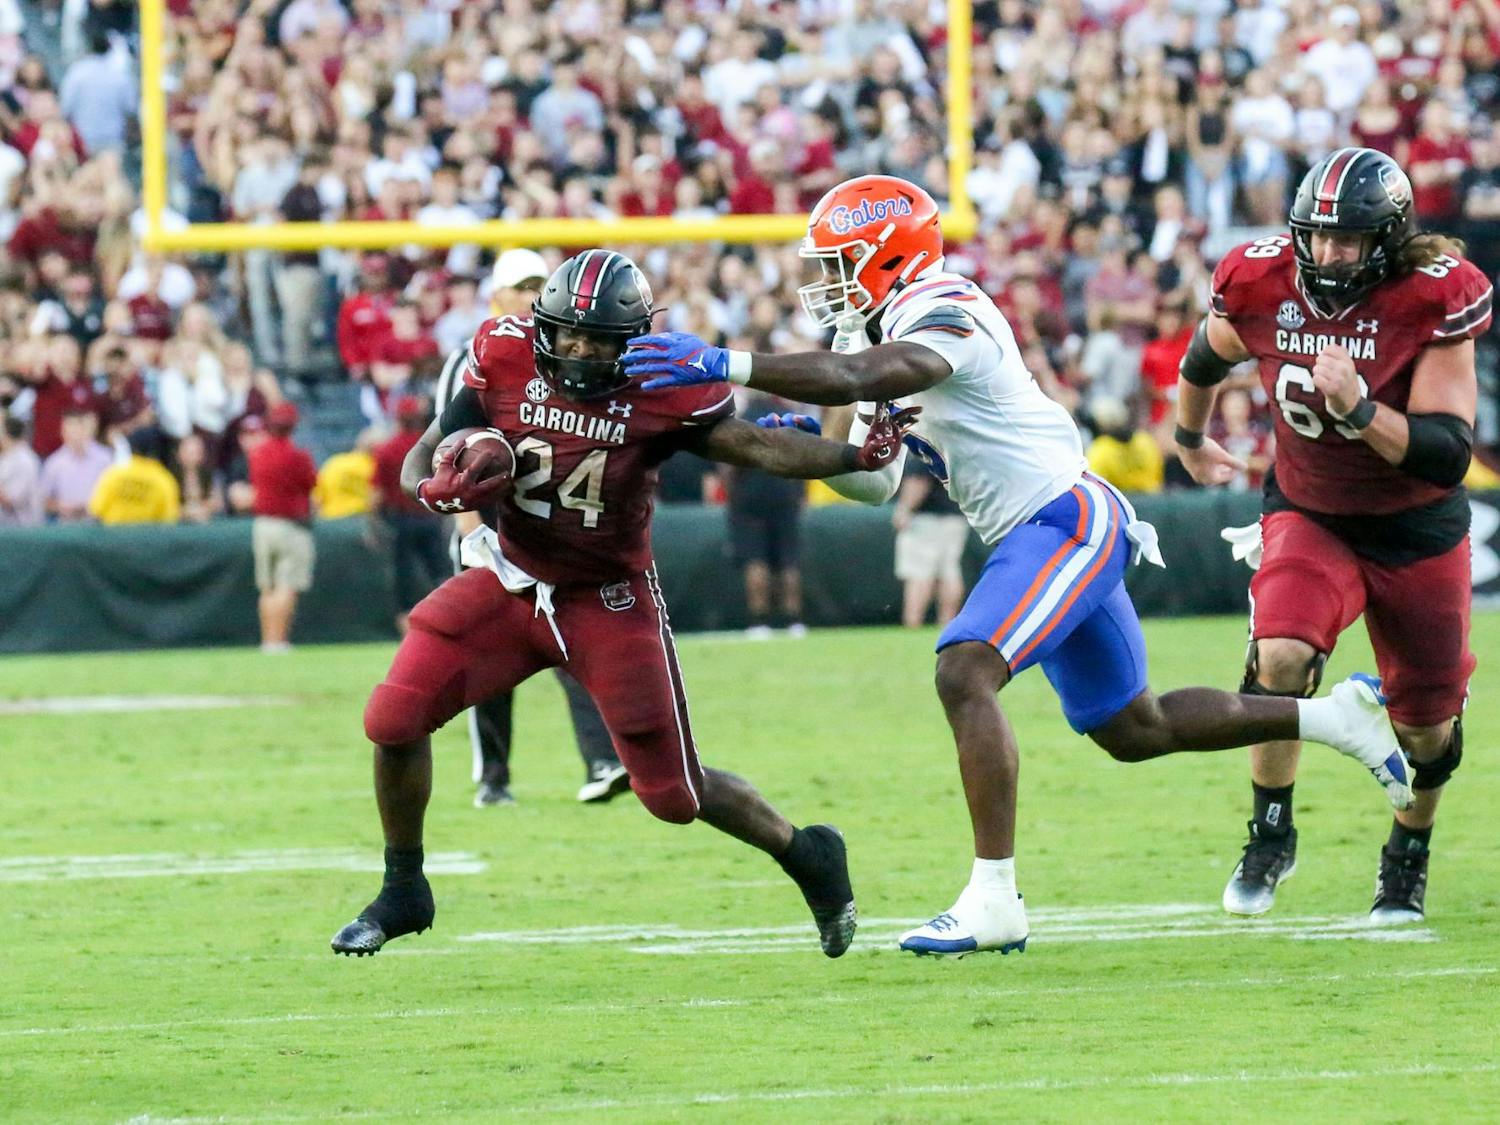 Redshirt senior running back Mario Anderson stiff arms a Gator defender during South Carolina’s game against Florida on Oct. 14, 2023, at Williams-Brice Stadium. With 98 rushing yards and 23 receiving yards, Anderson had his second consecutive game with more than 100 all-purpose yards.